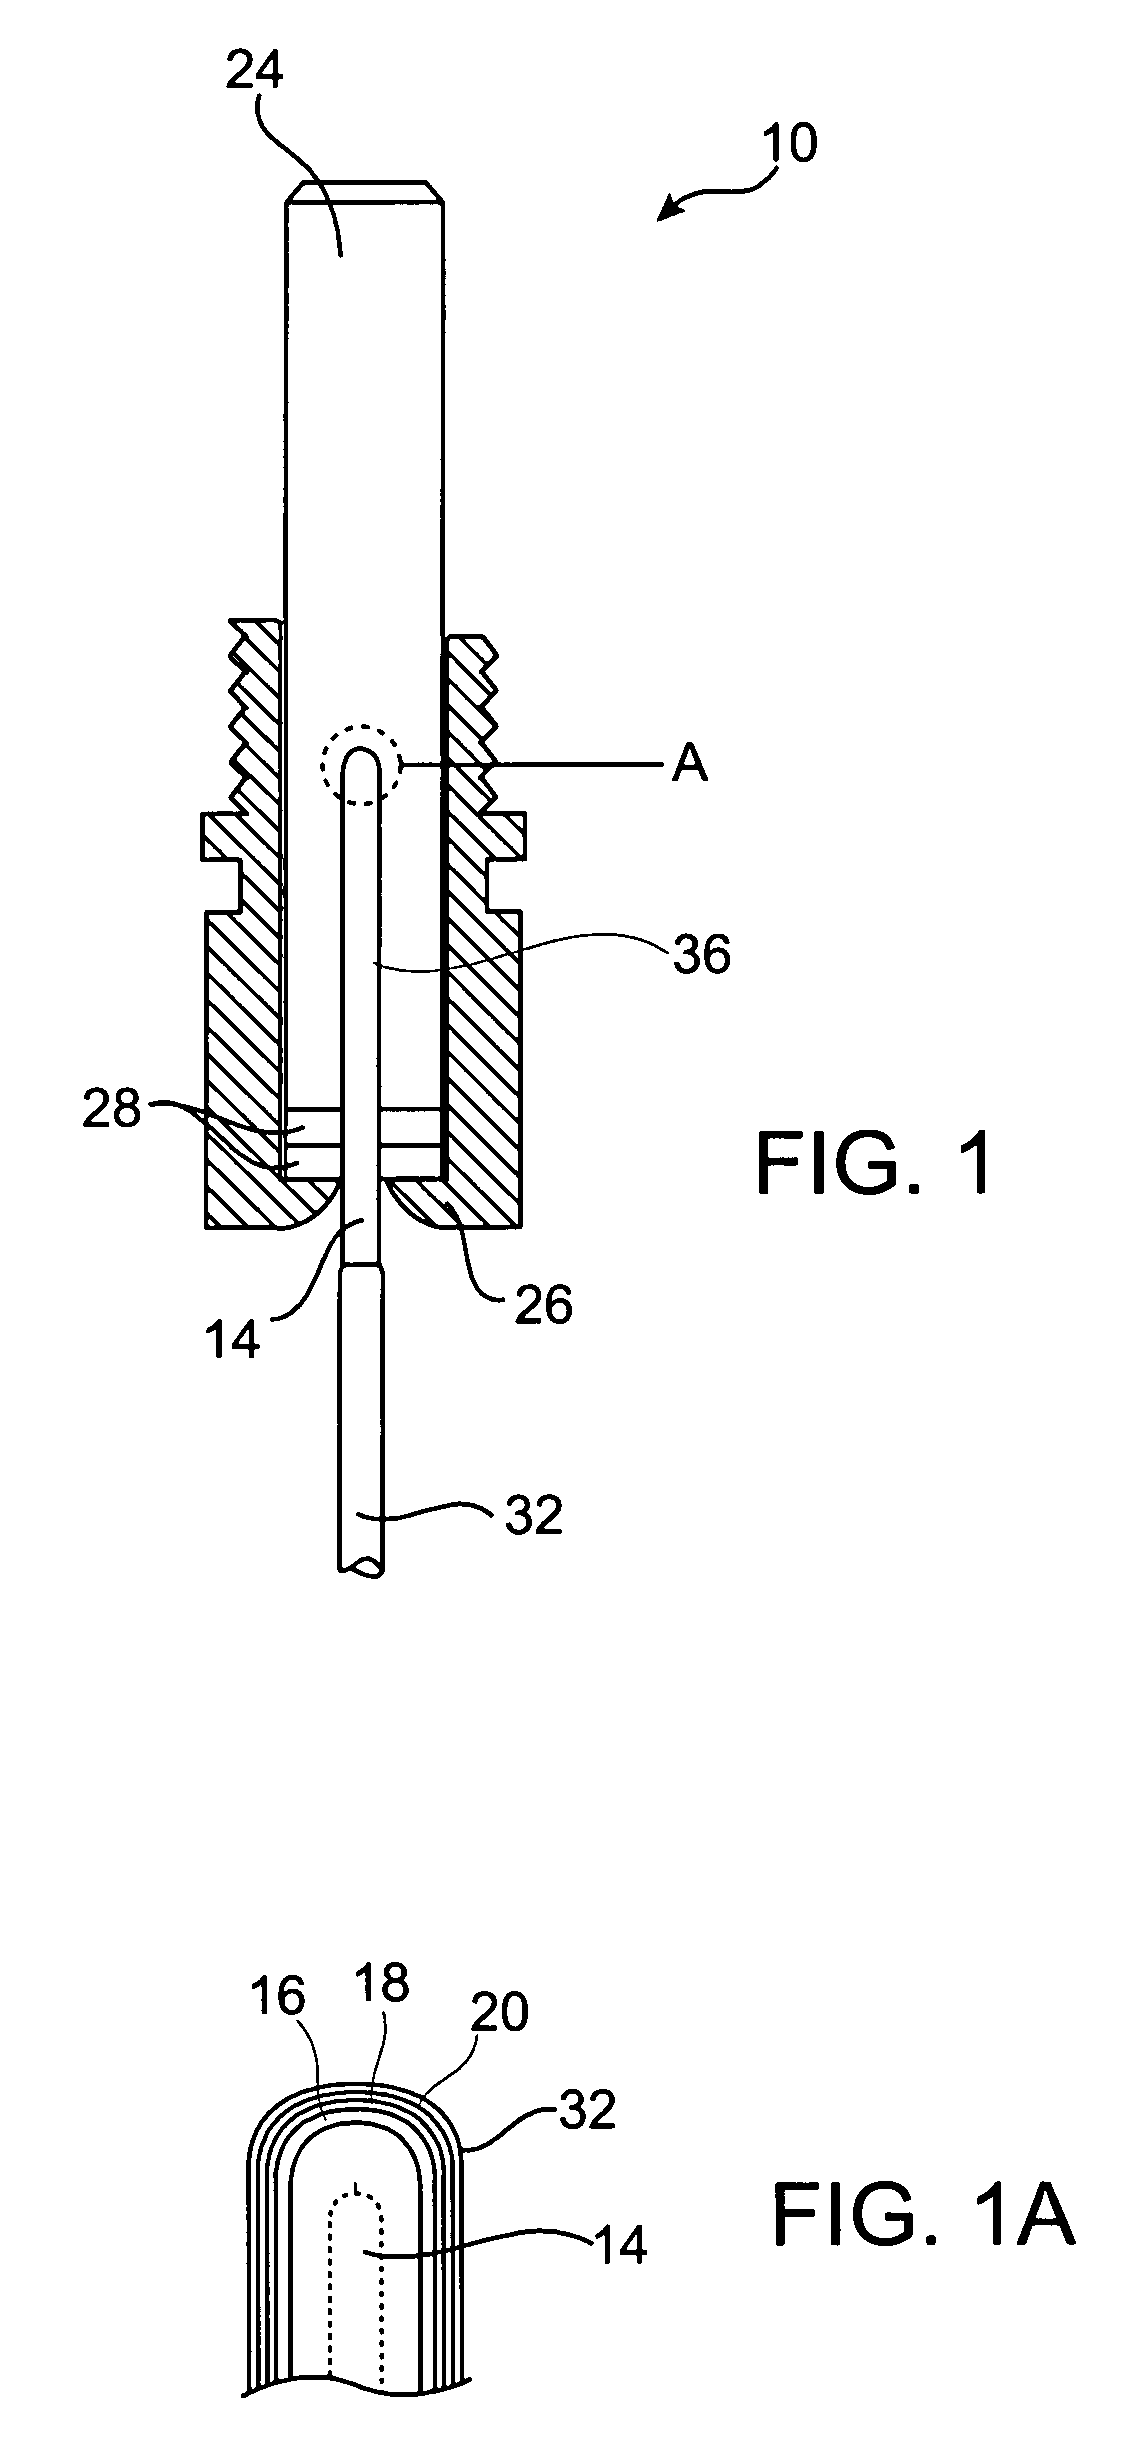 Temperature sensing system for temperature measurement in a high radio frequency environment